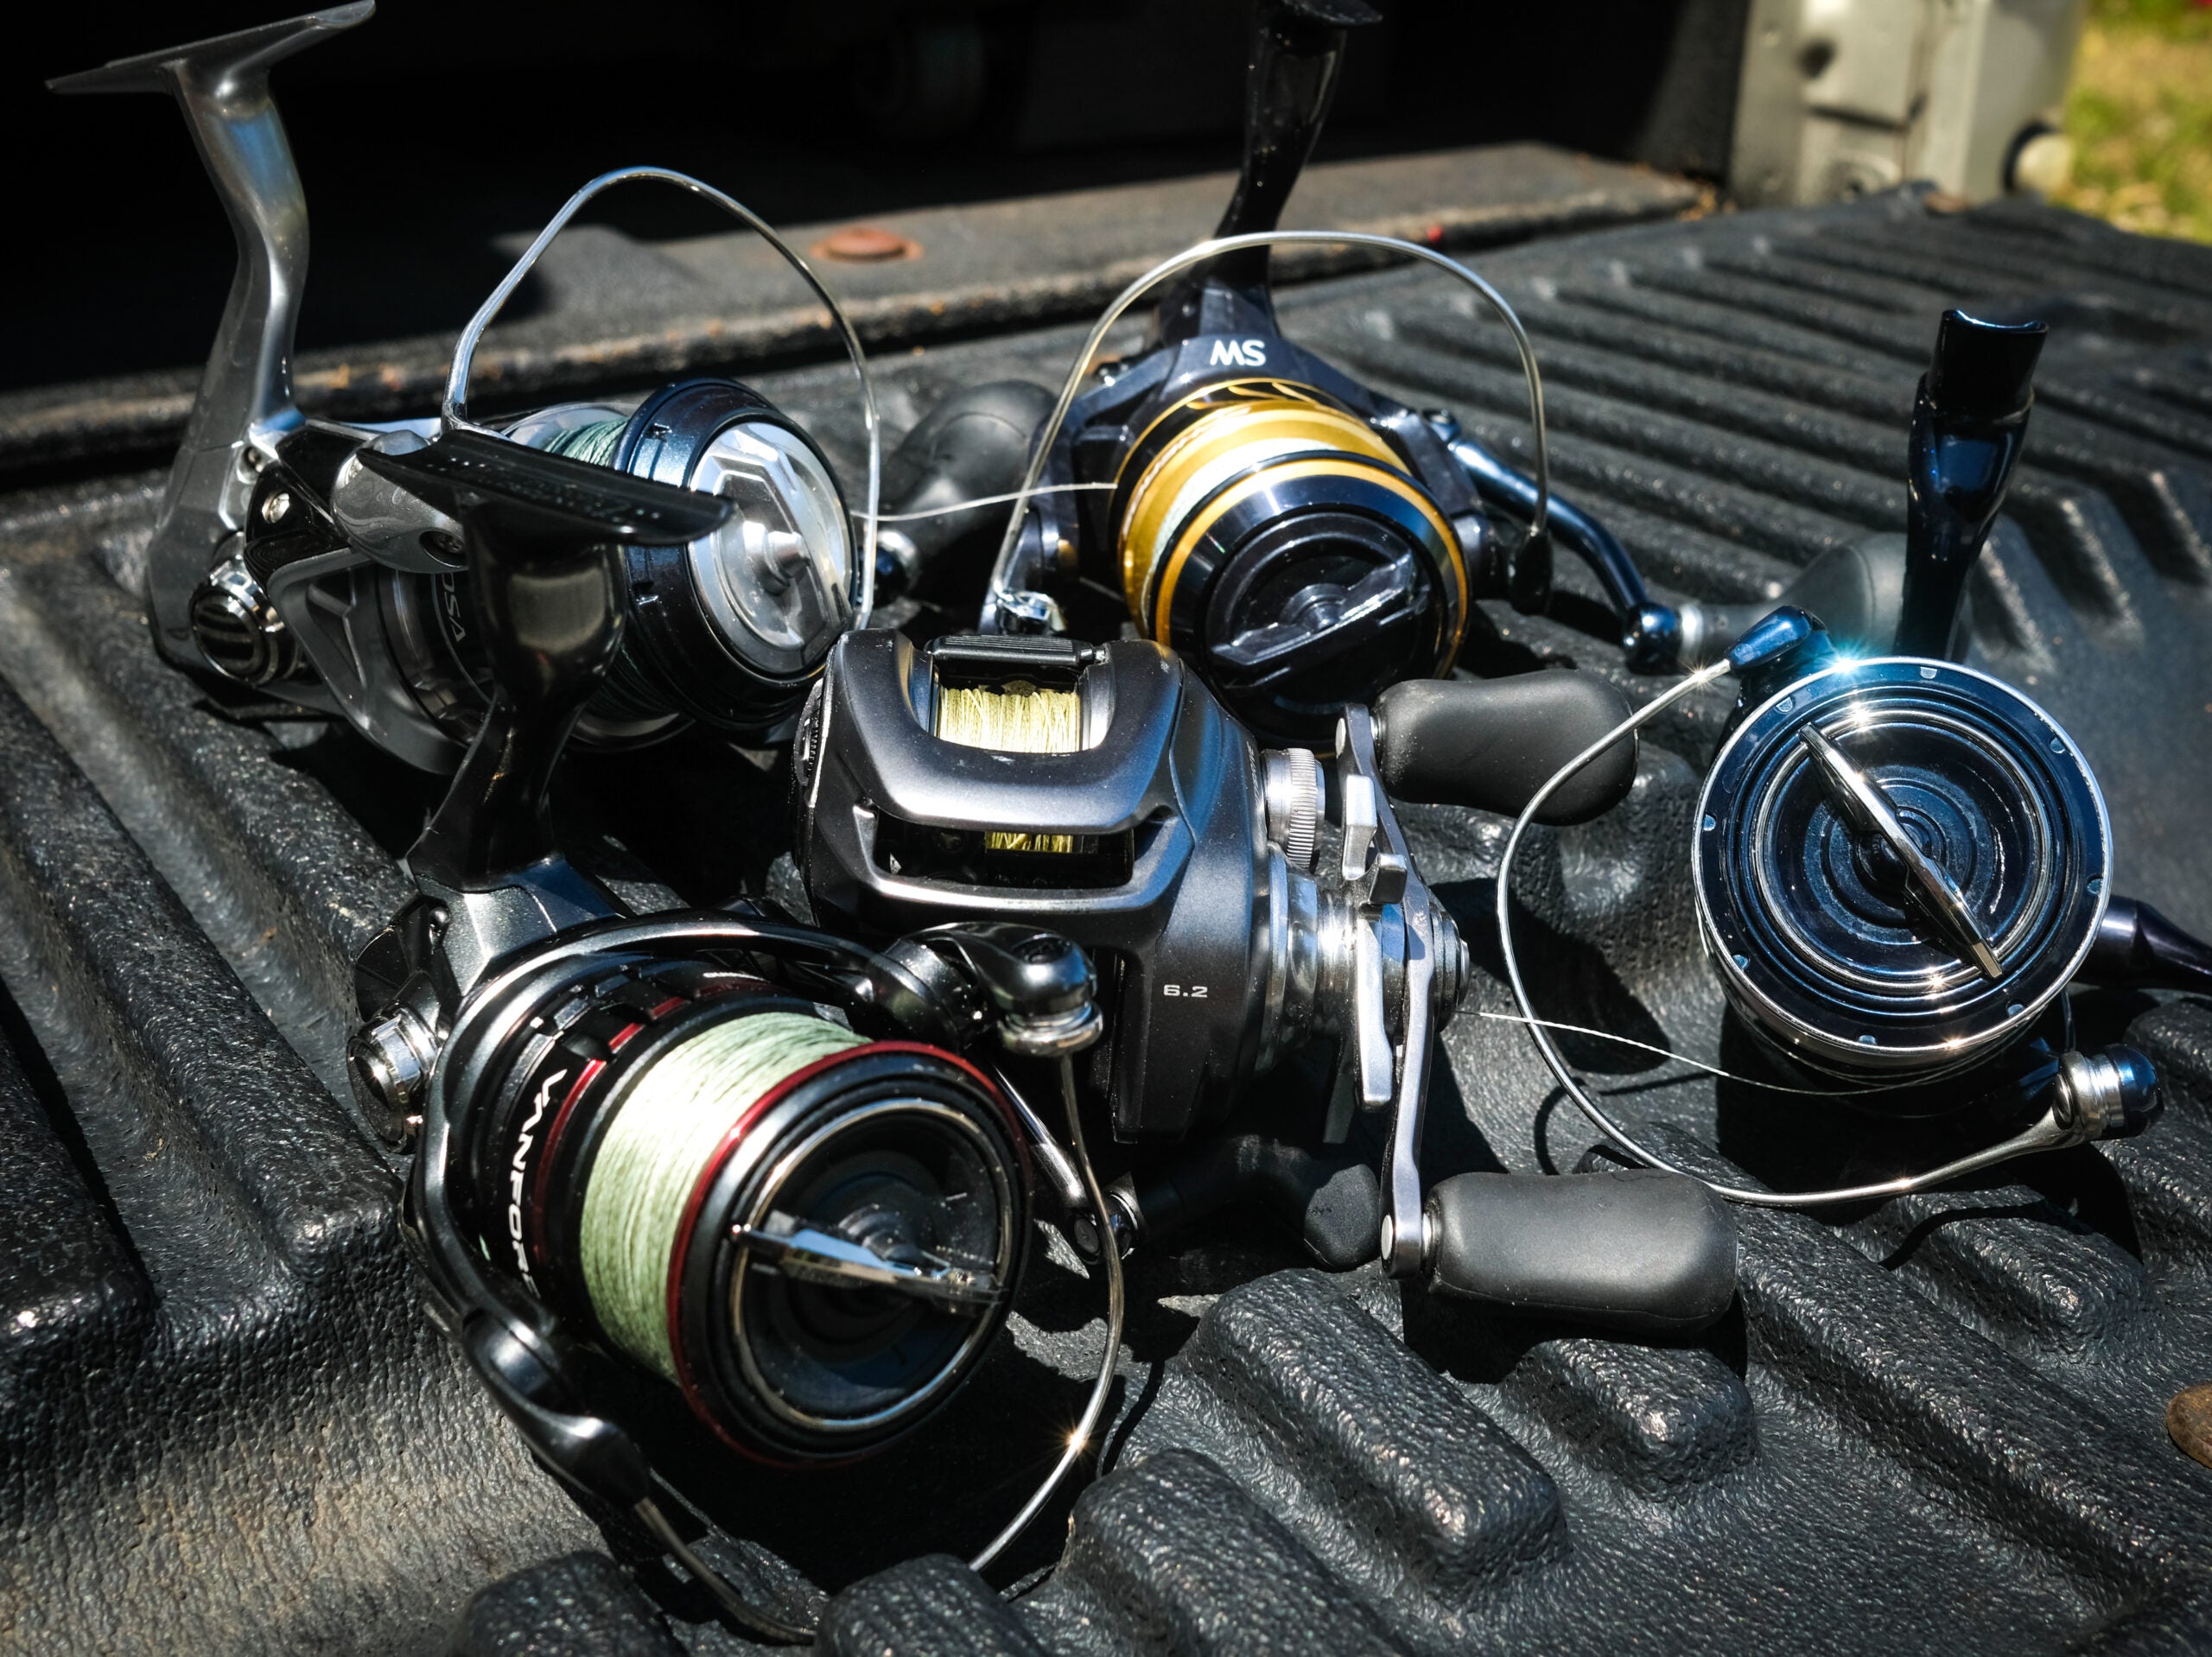 Gettin Nasci.. Is This The Best Budget Friendly Shimano Inshore Fishing  Reel 